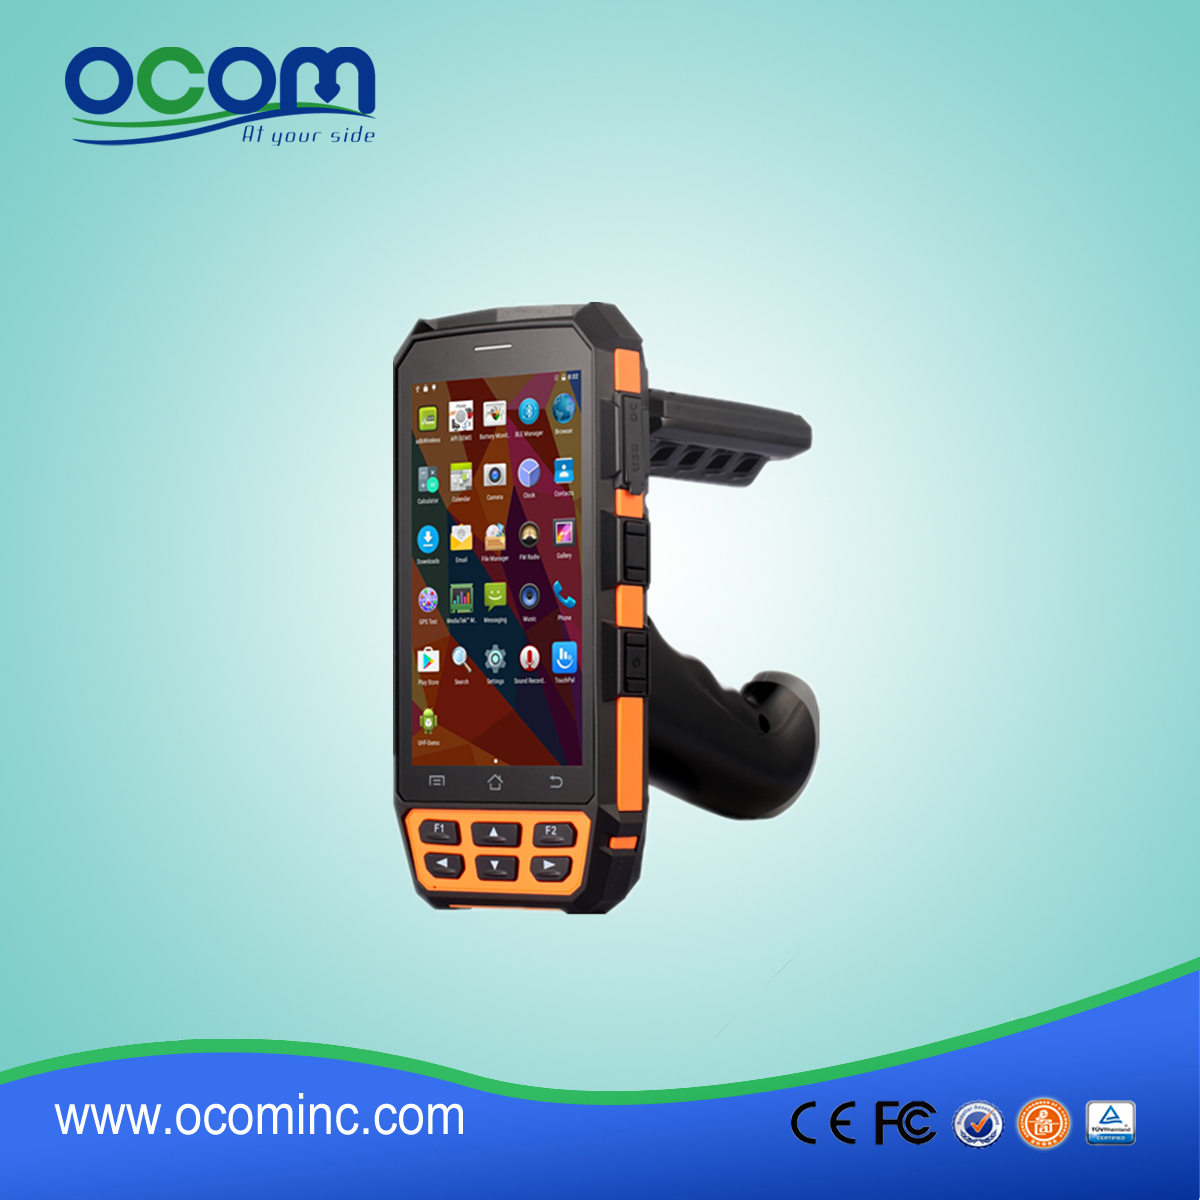 OCBS-D5000 Rugged Industrial Android PDA με αναγνώστη δακτυλικών αποτυπωμάτων 2d barcode scanner